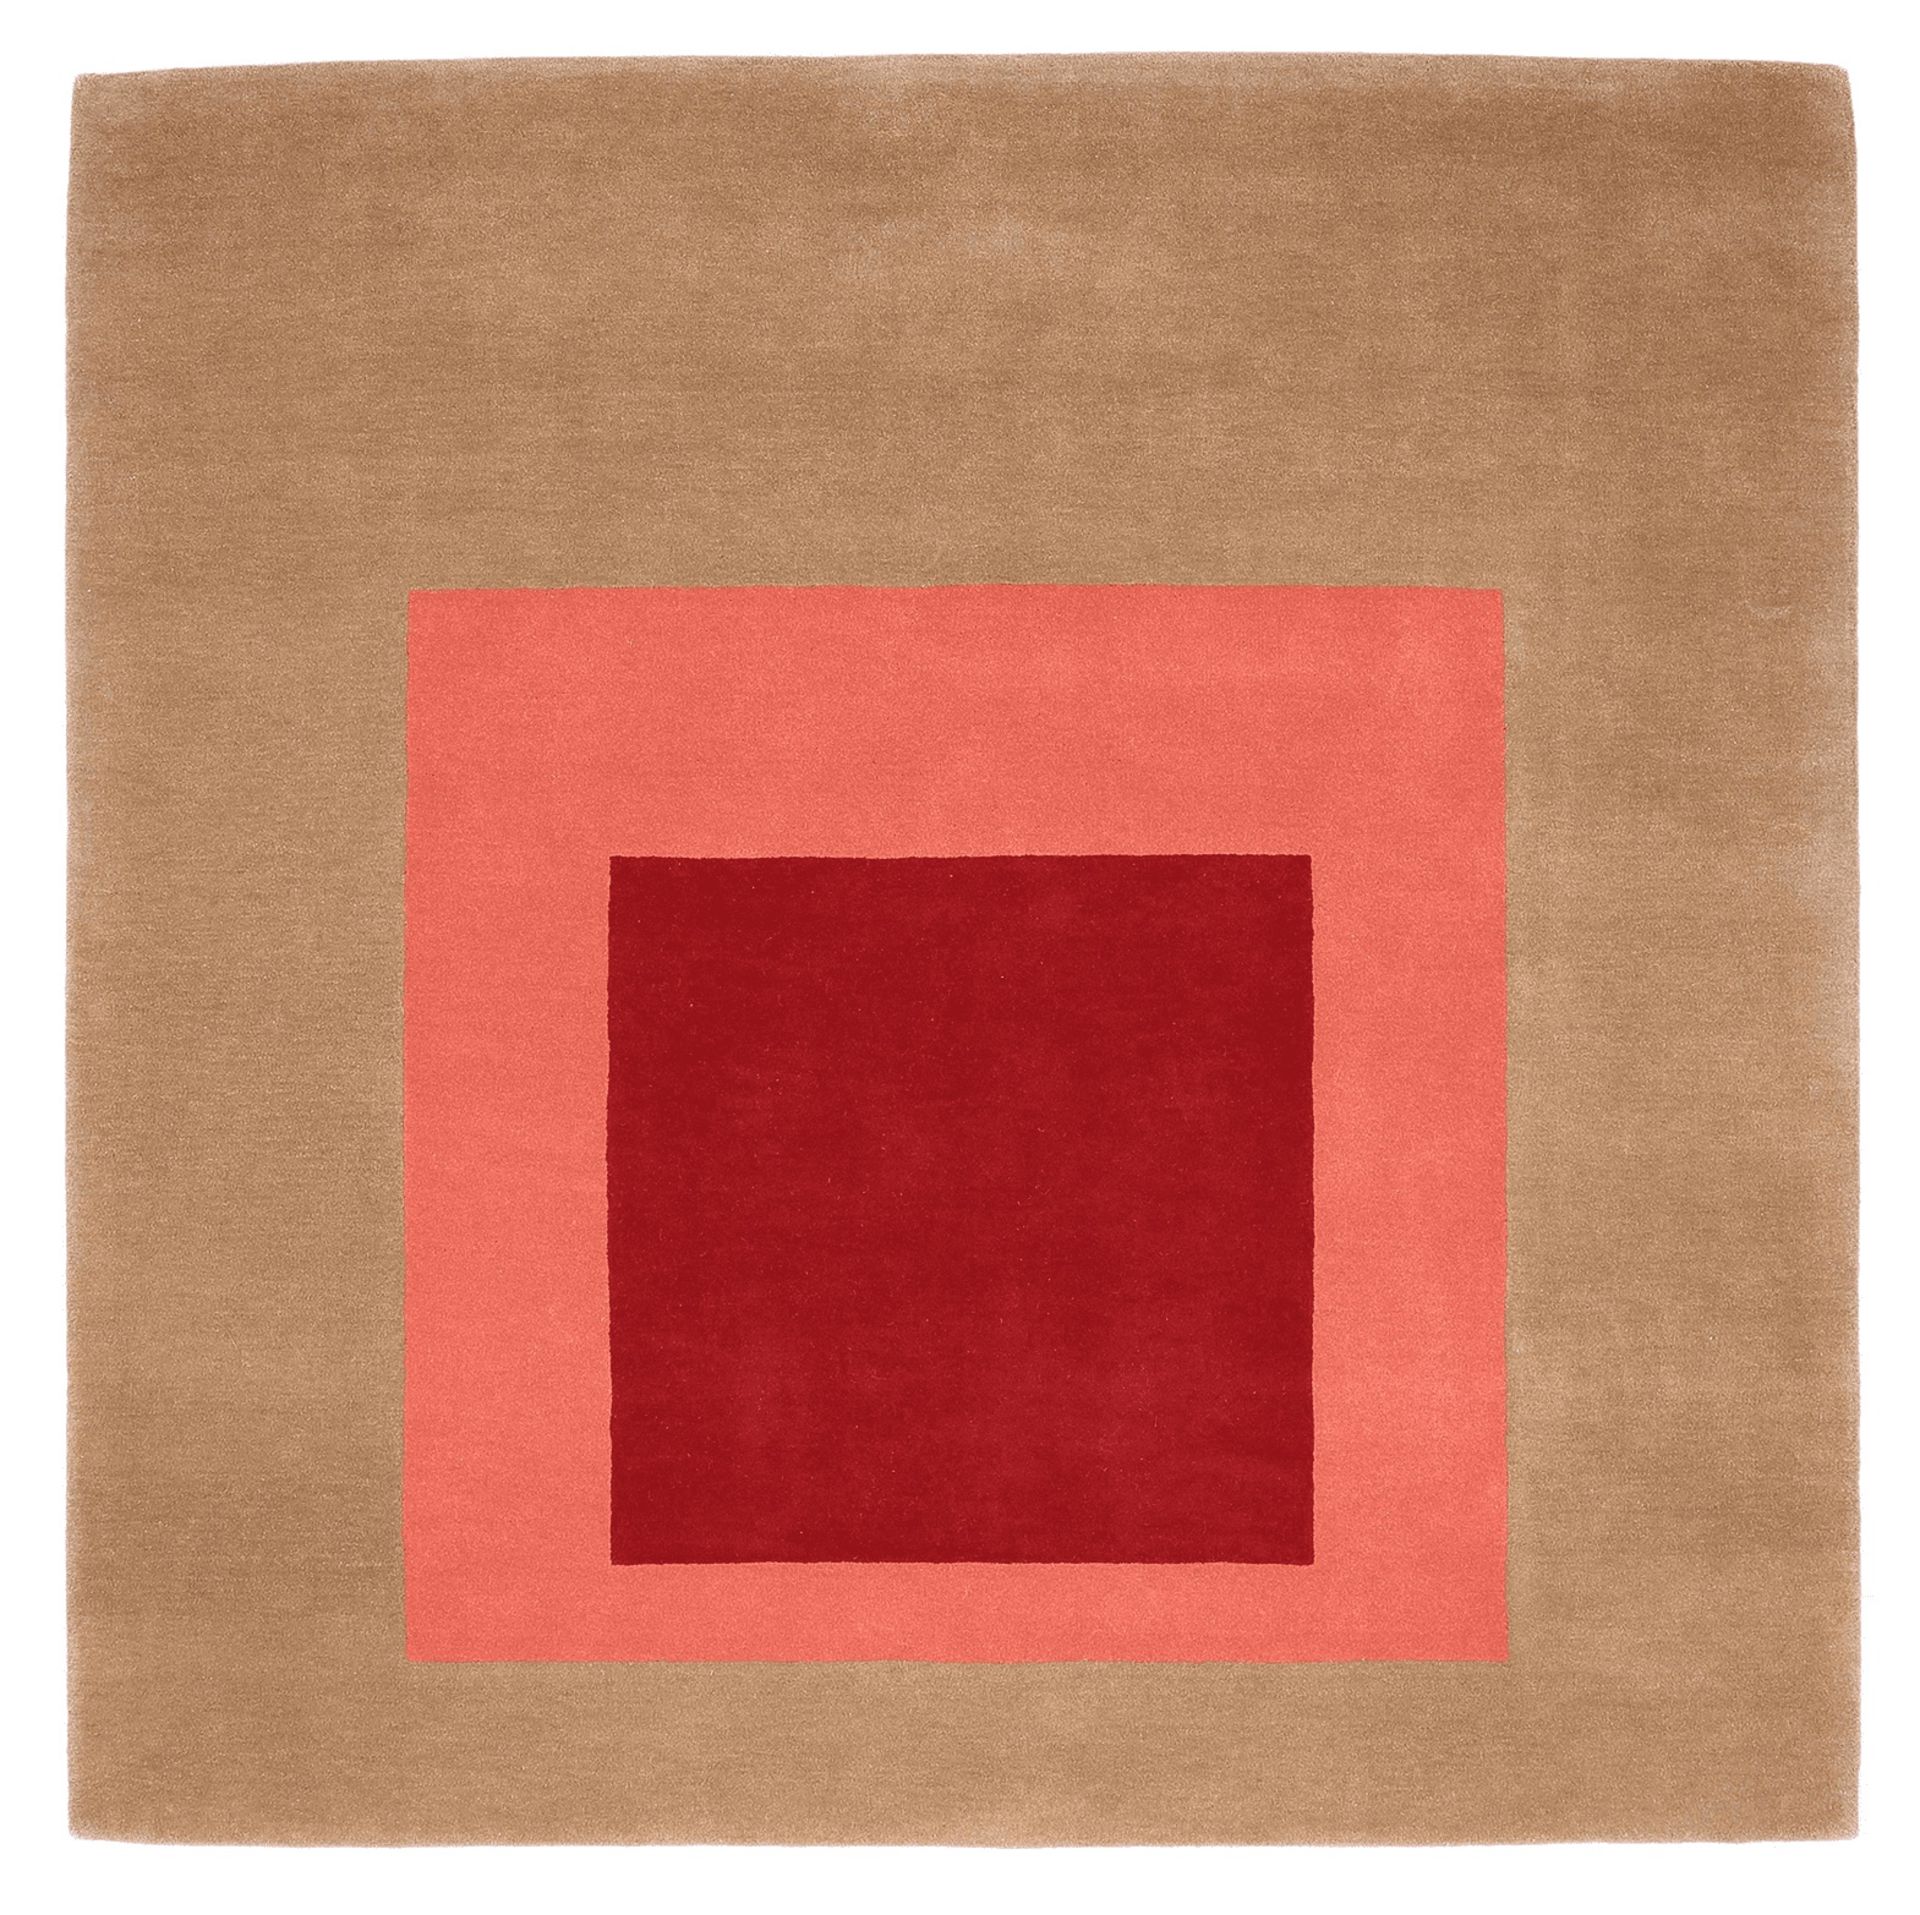 Joseph Albers "Homeage to the Square" Rug